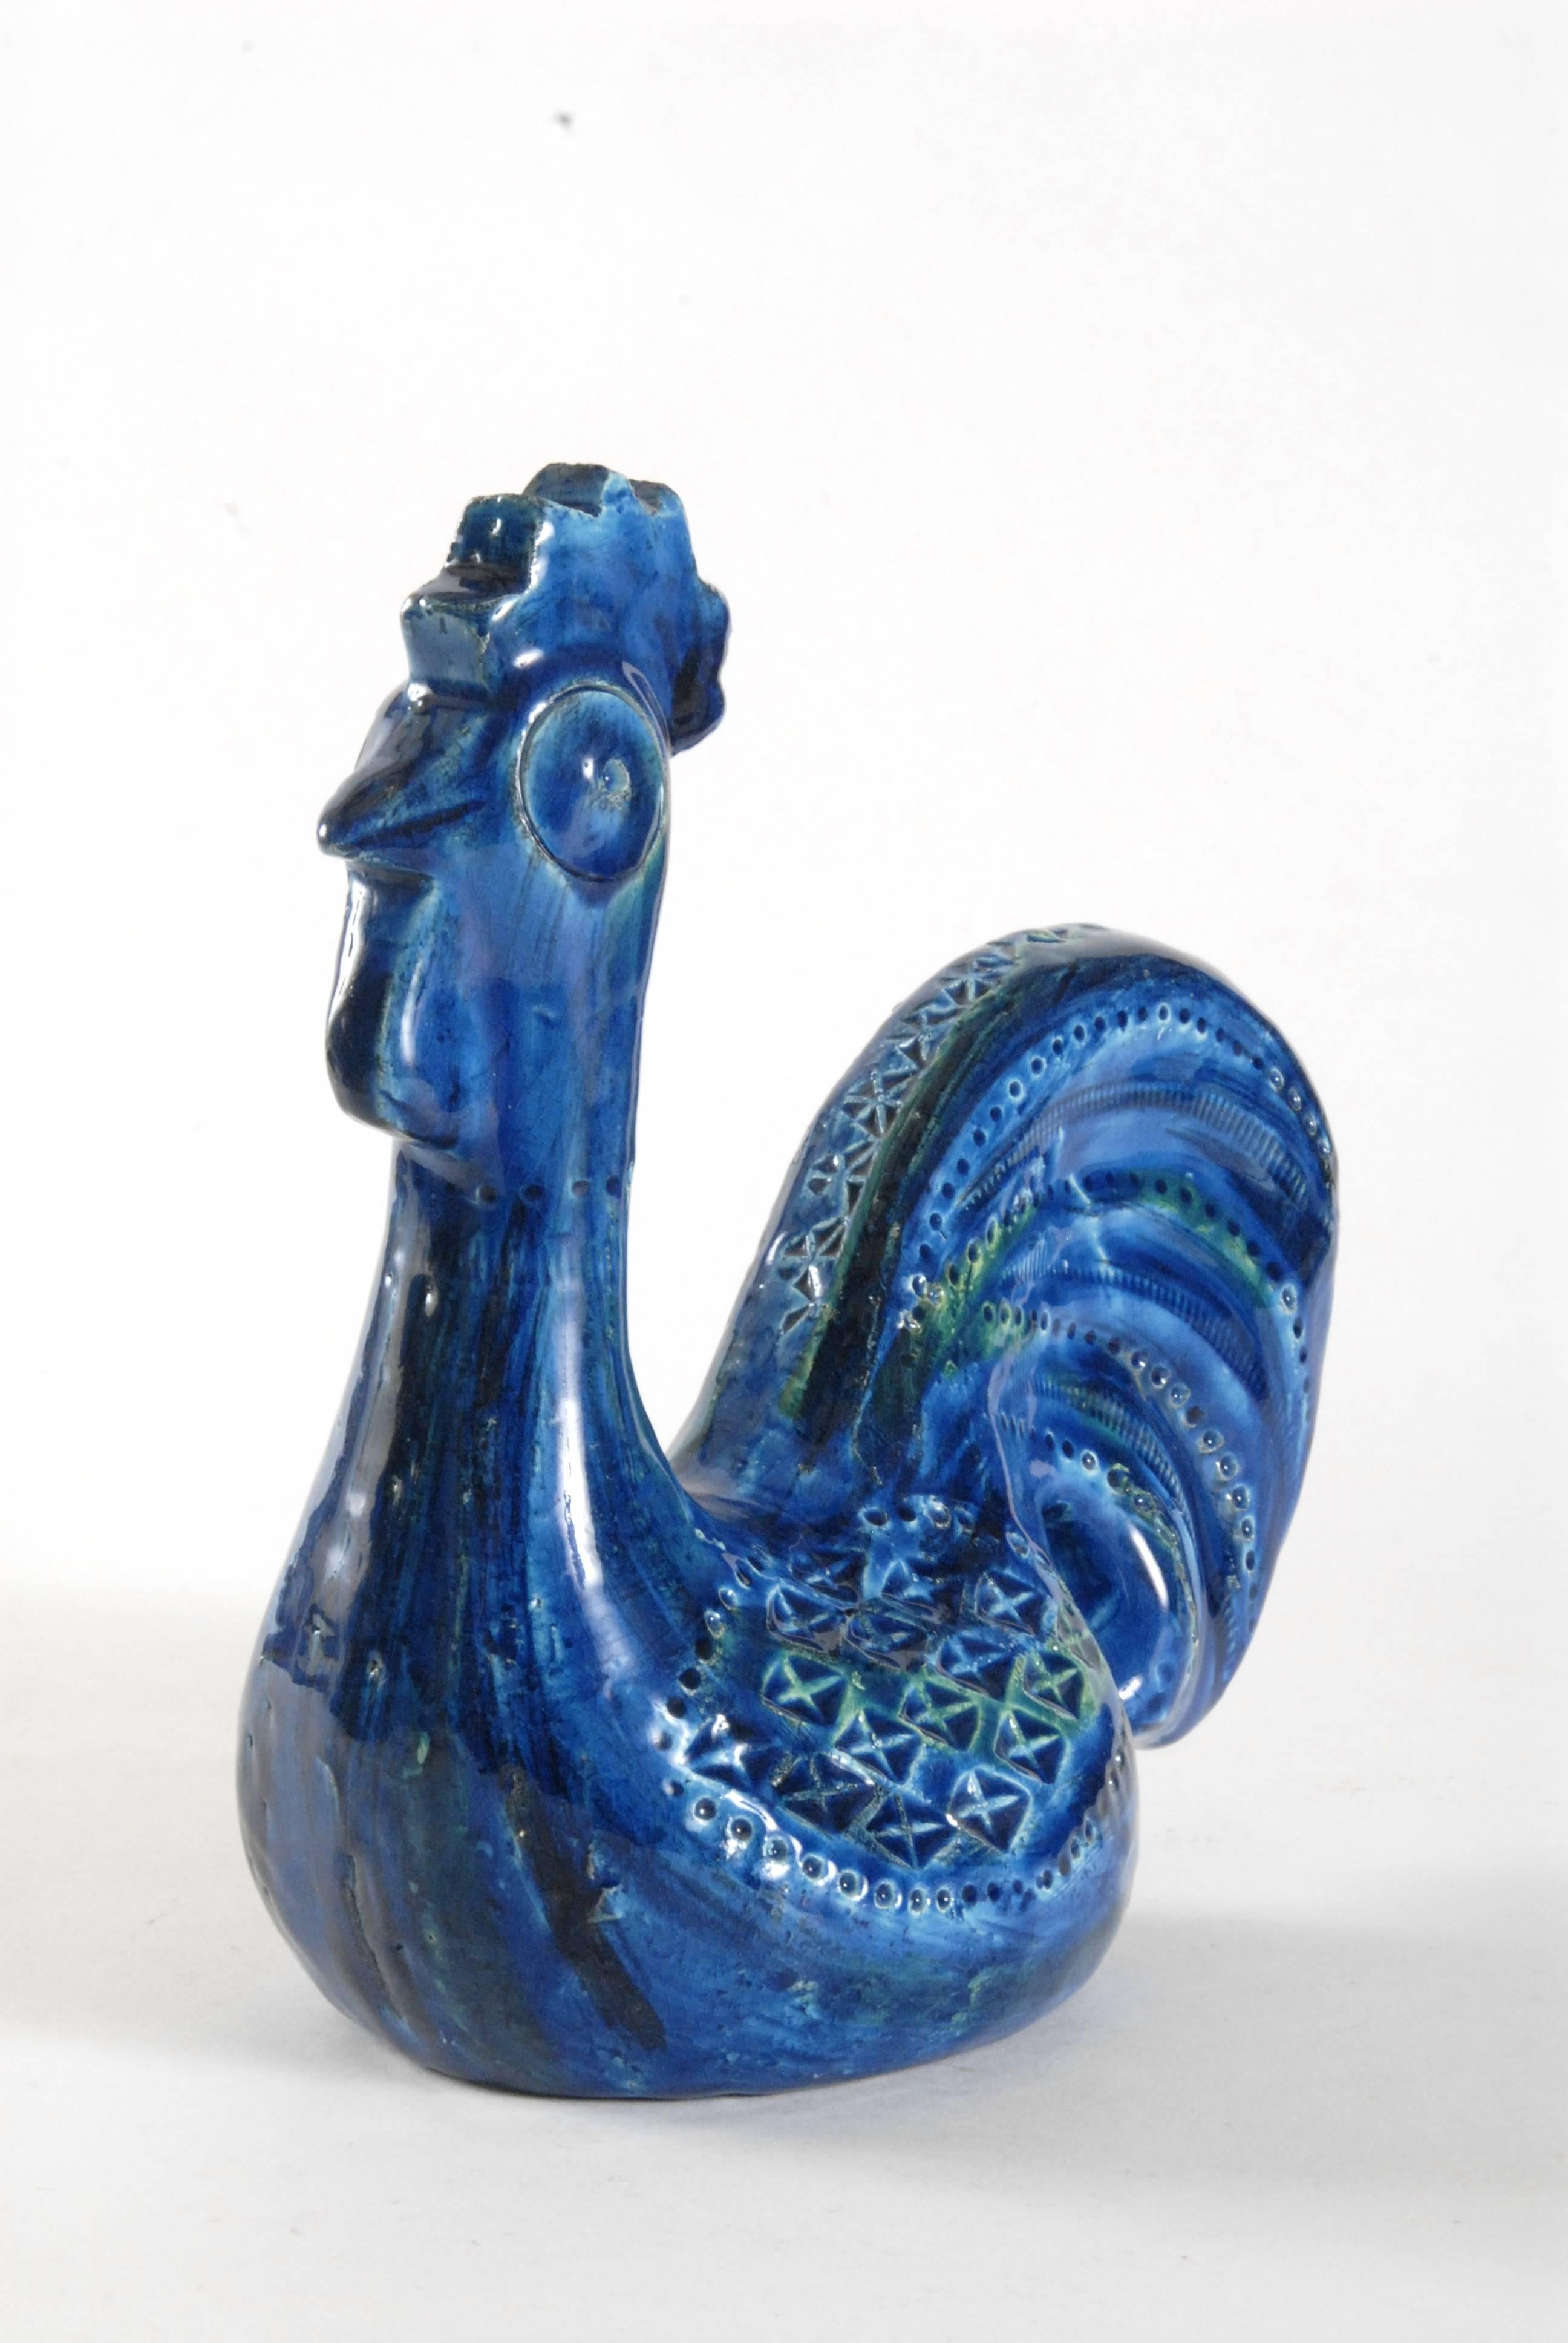 A large sitting rooster by Aldo Londi in 'Rimini Blu' in top condition.